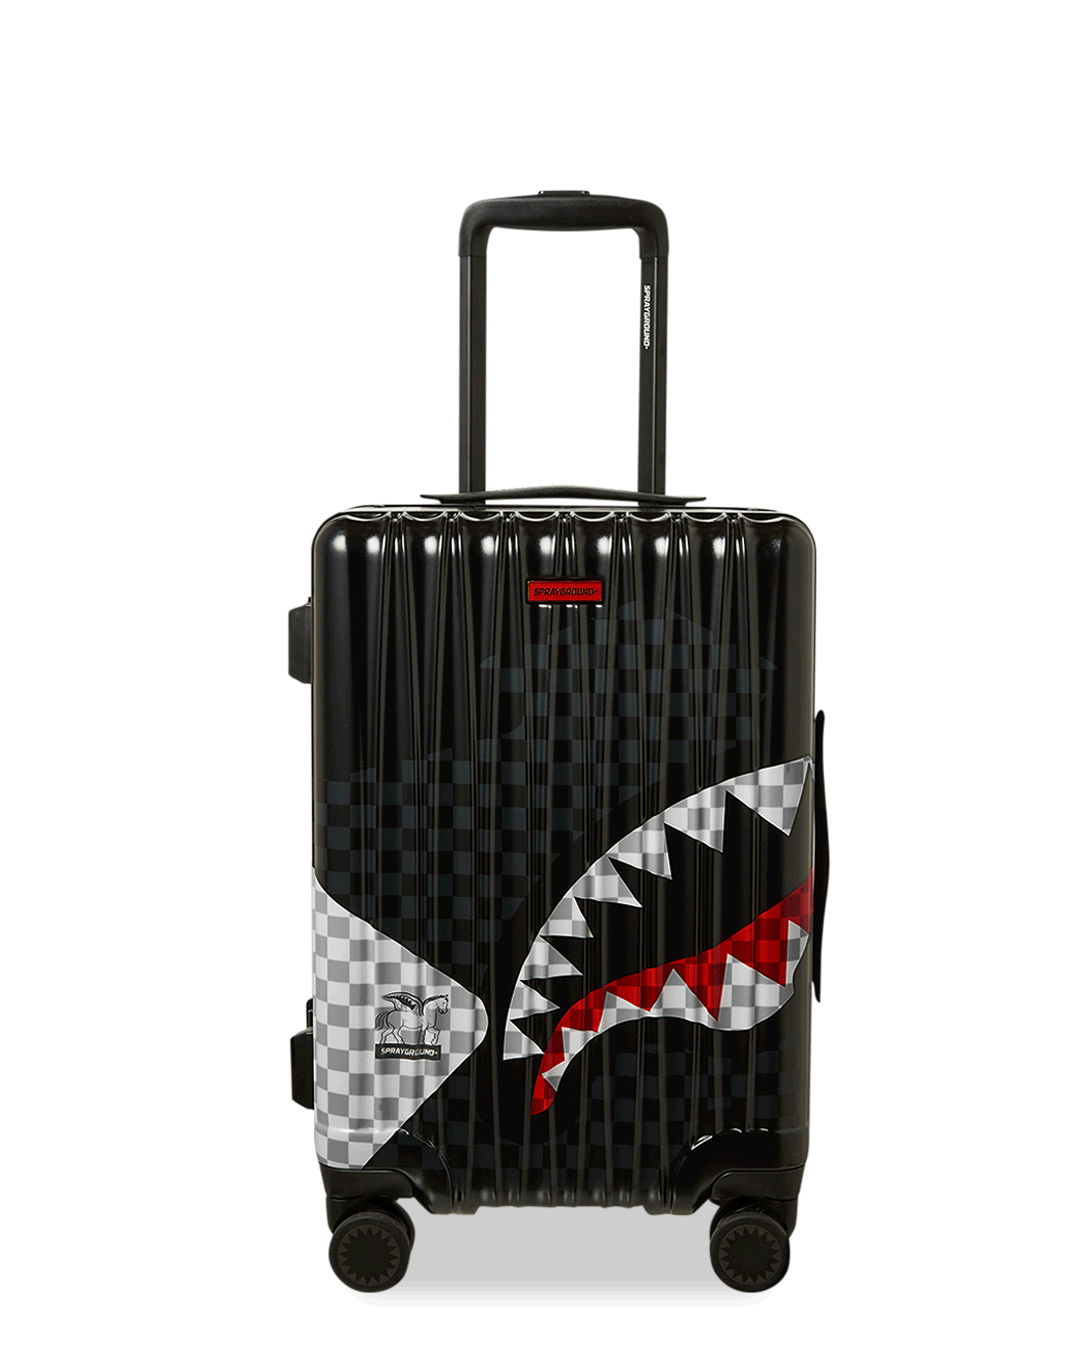 TRIPLE DECKER HEIR TO THE THRONE CARRY-ON LUGGAGE